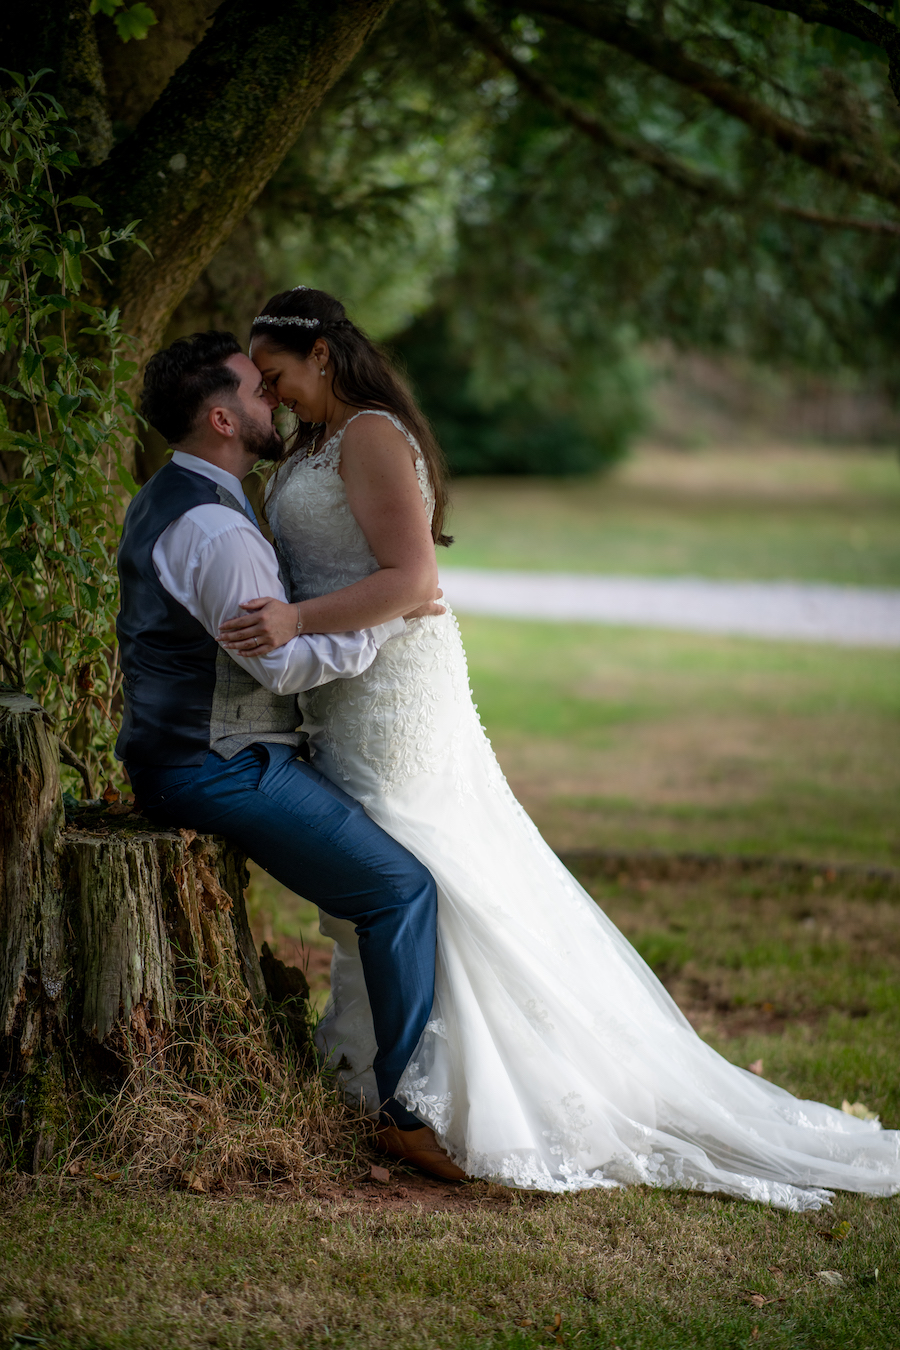 Couple sharing a quiet moment with groom sat on a tree stump under large trees